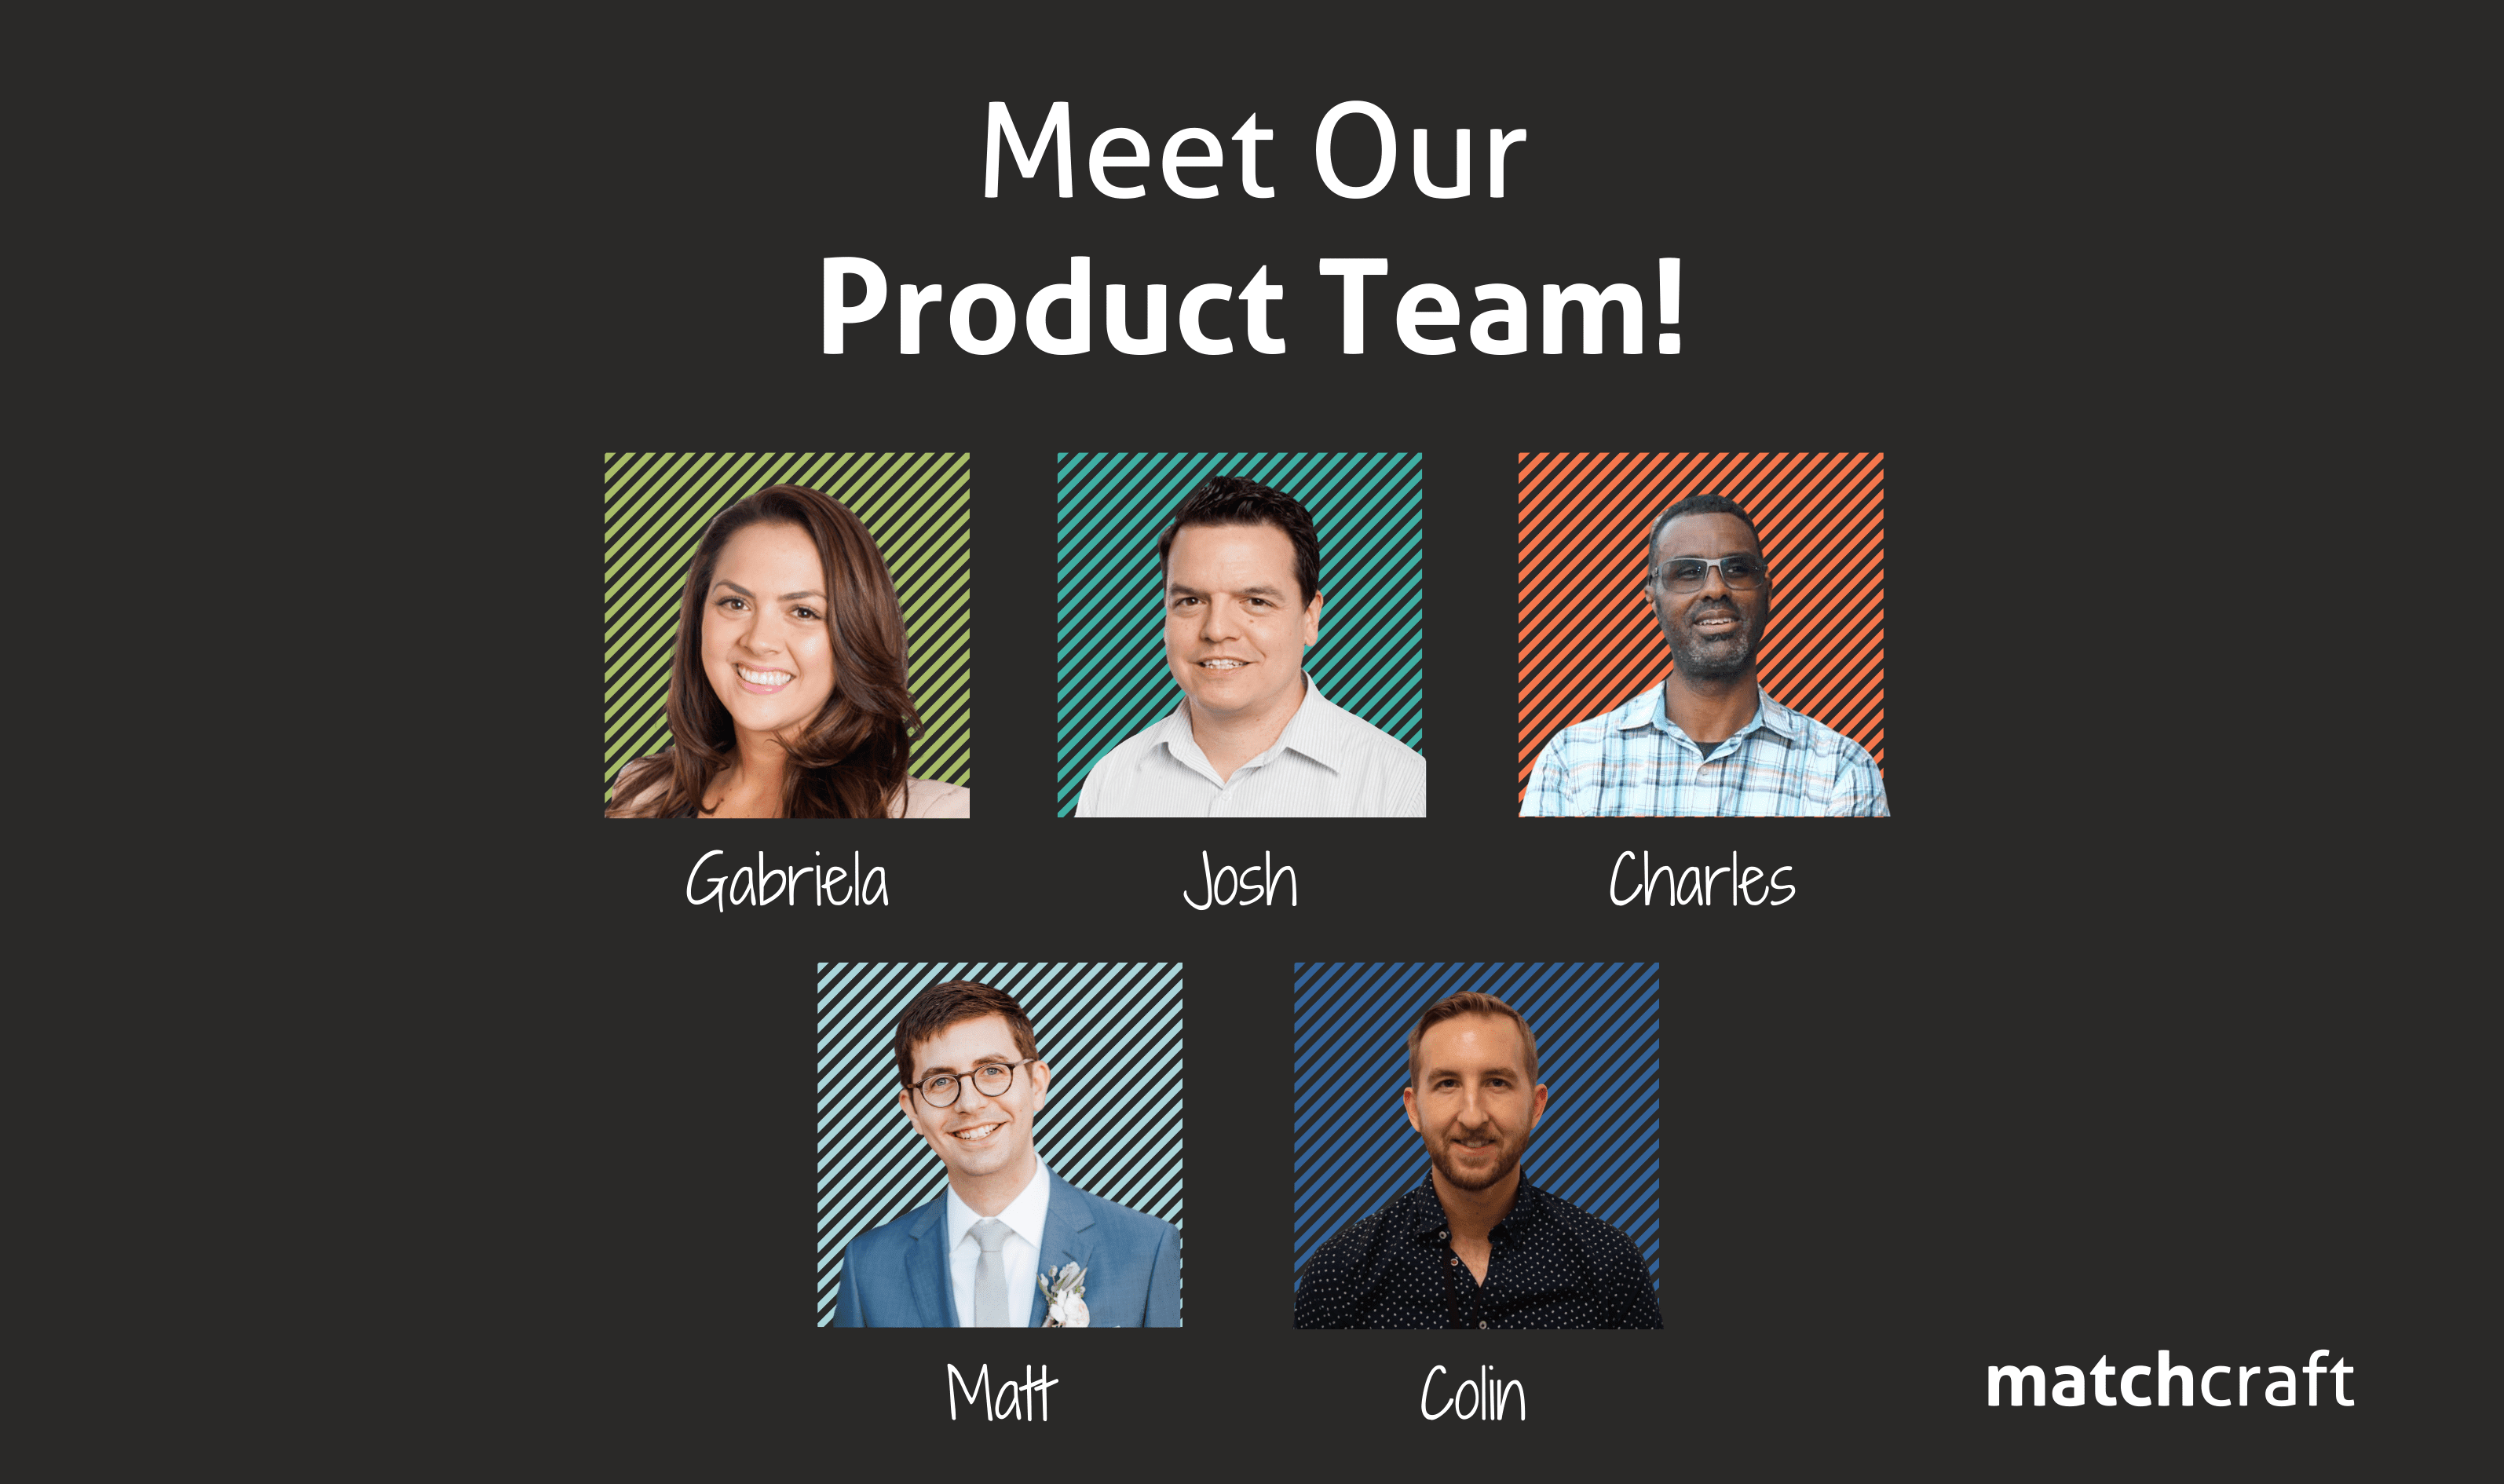 Meet Our Product Team!